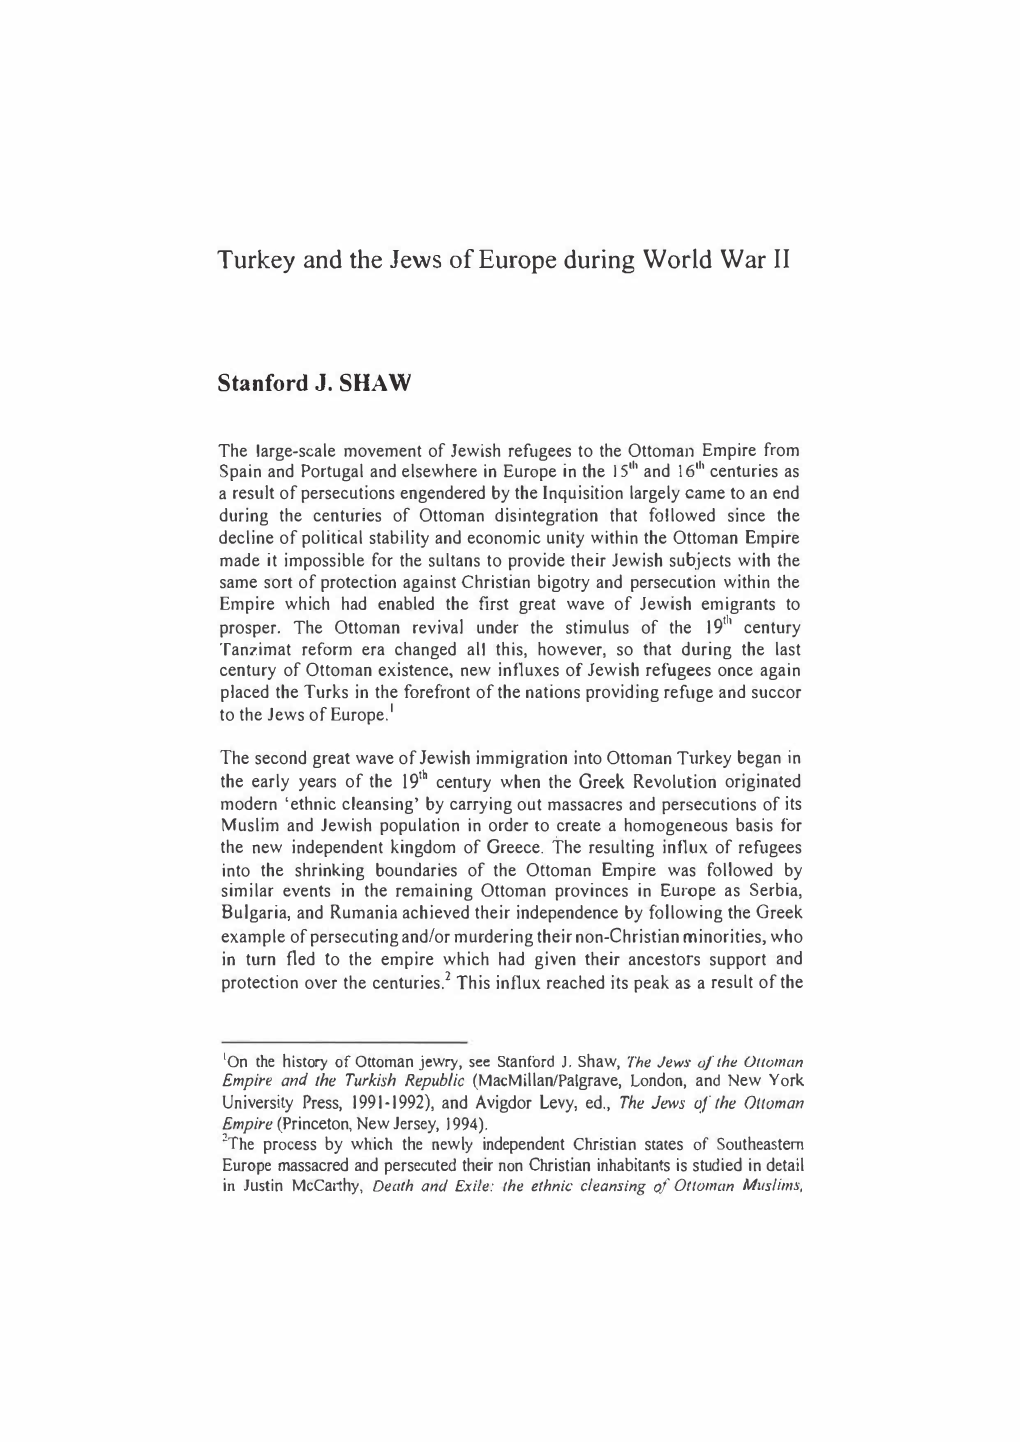 Turkey and the Jews of Europe During World War II